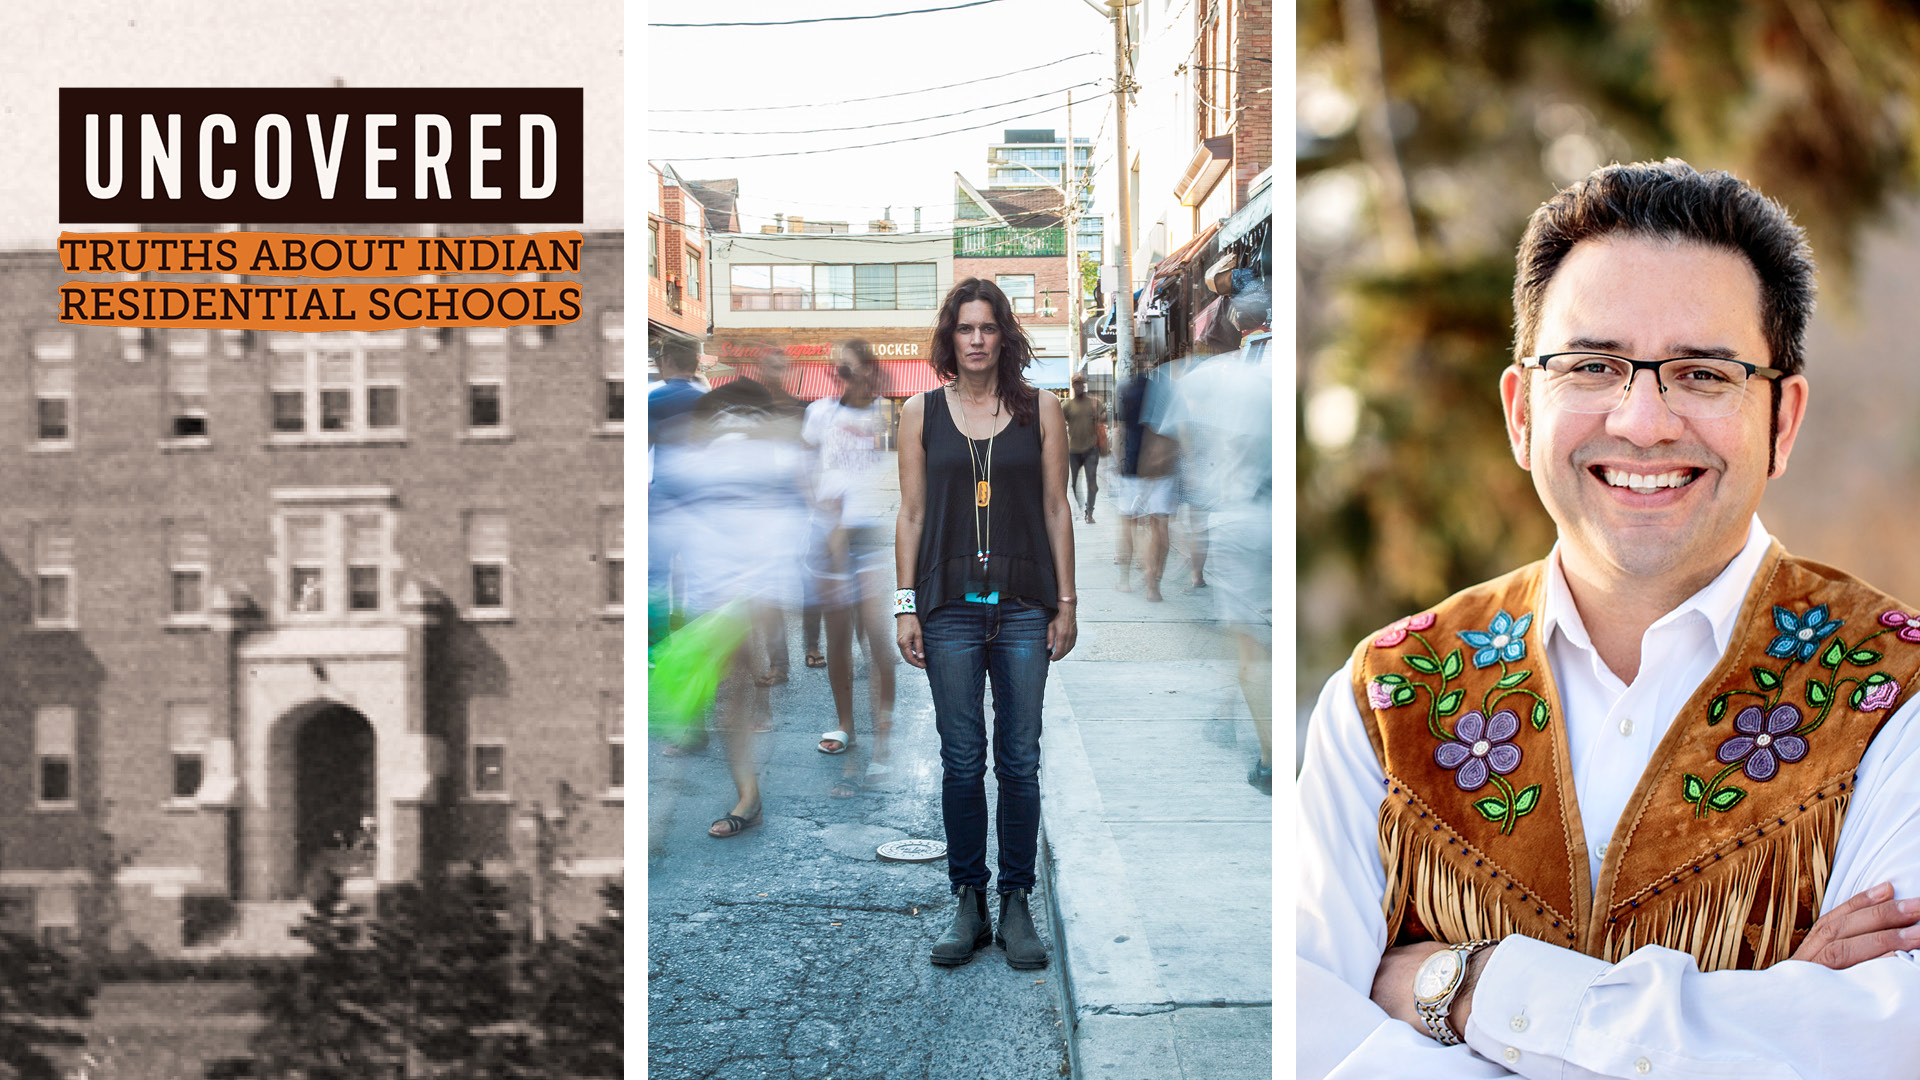 Image split into three: A black and white photo of a school and words on top of the image that read "Uncovered: Truths about Indian Residential Schools," a woman standing still amongst a crowd of people moving around her on a busy city street, and a man in a beaded fringe vest crossing his arms and smiling at the camera.